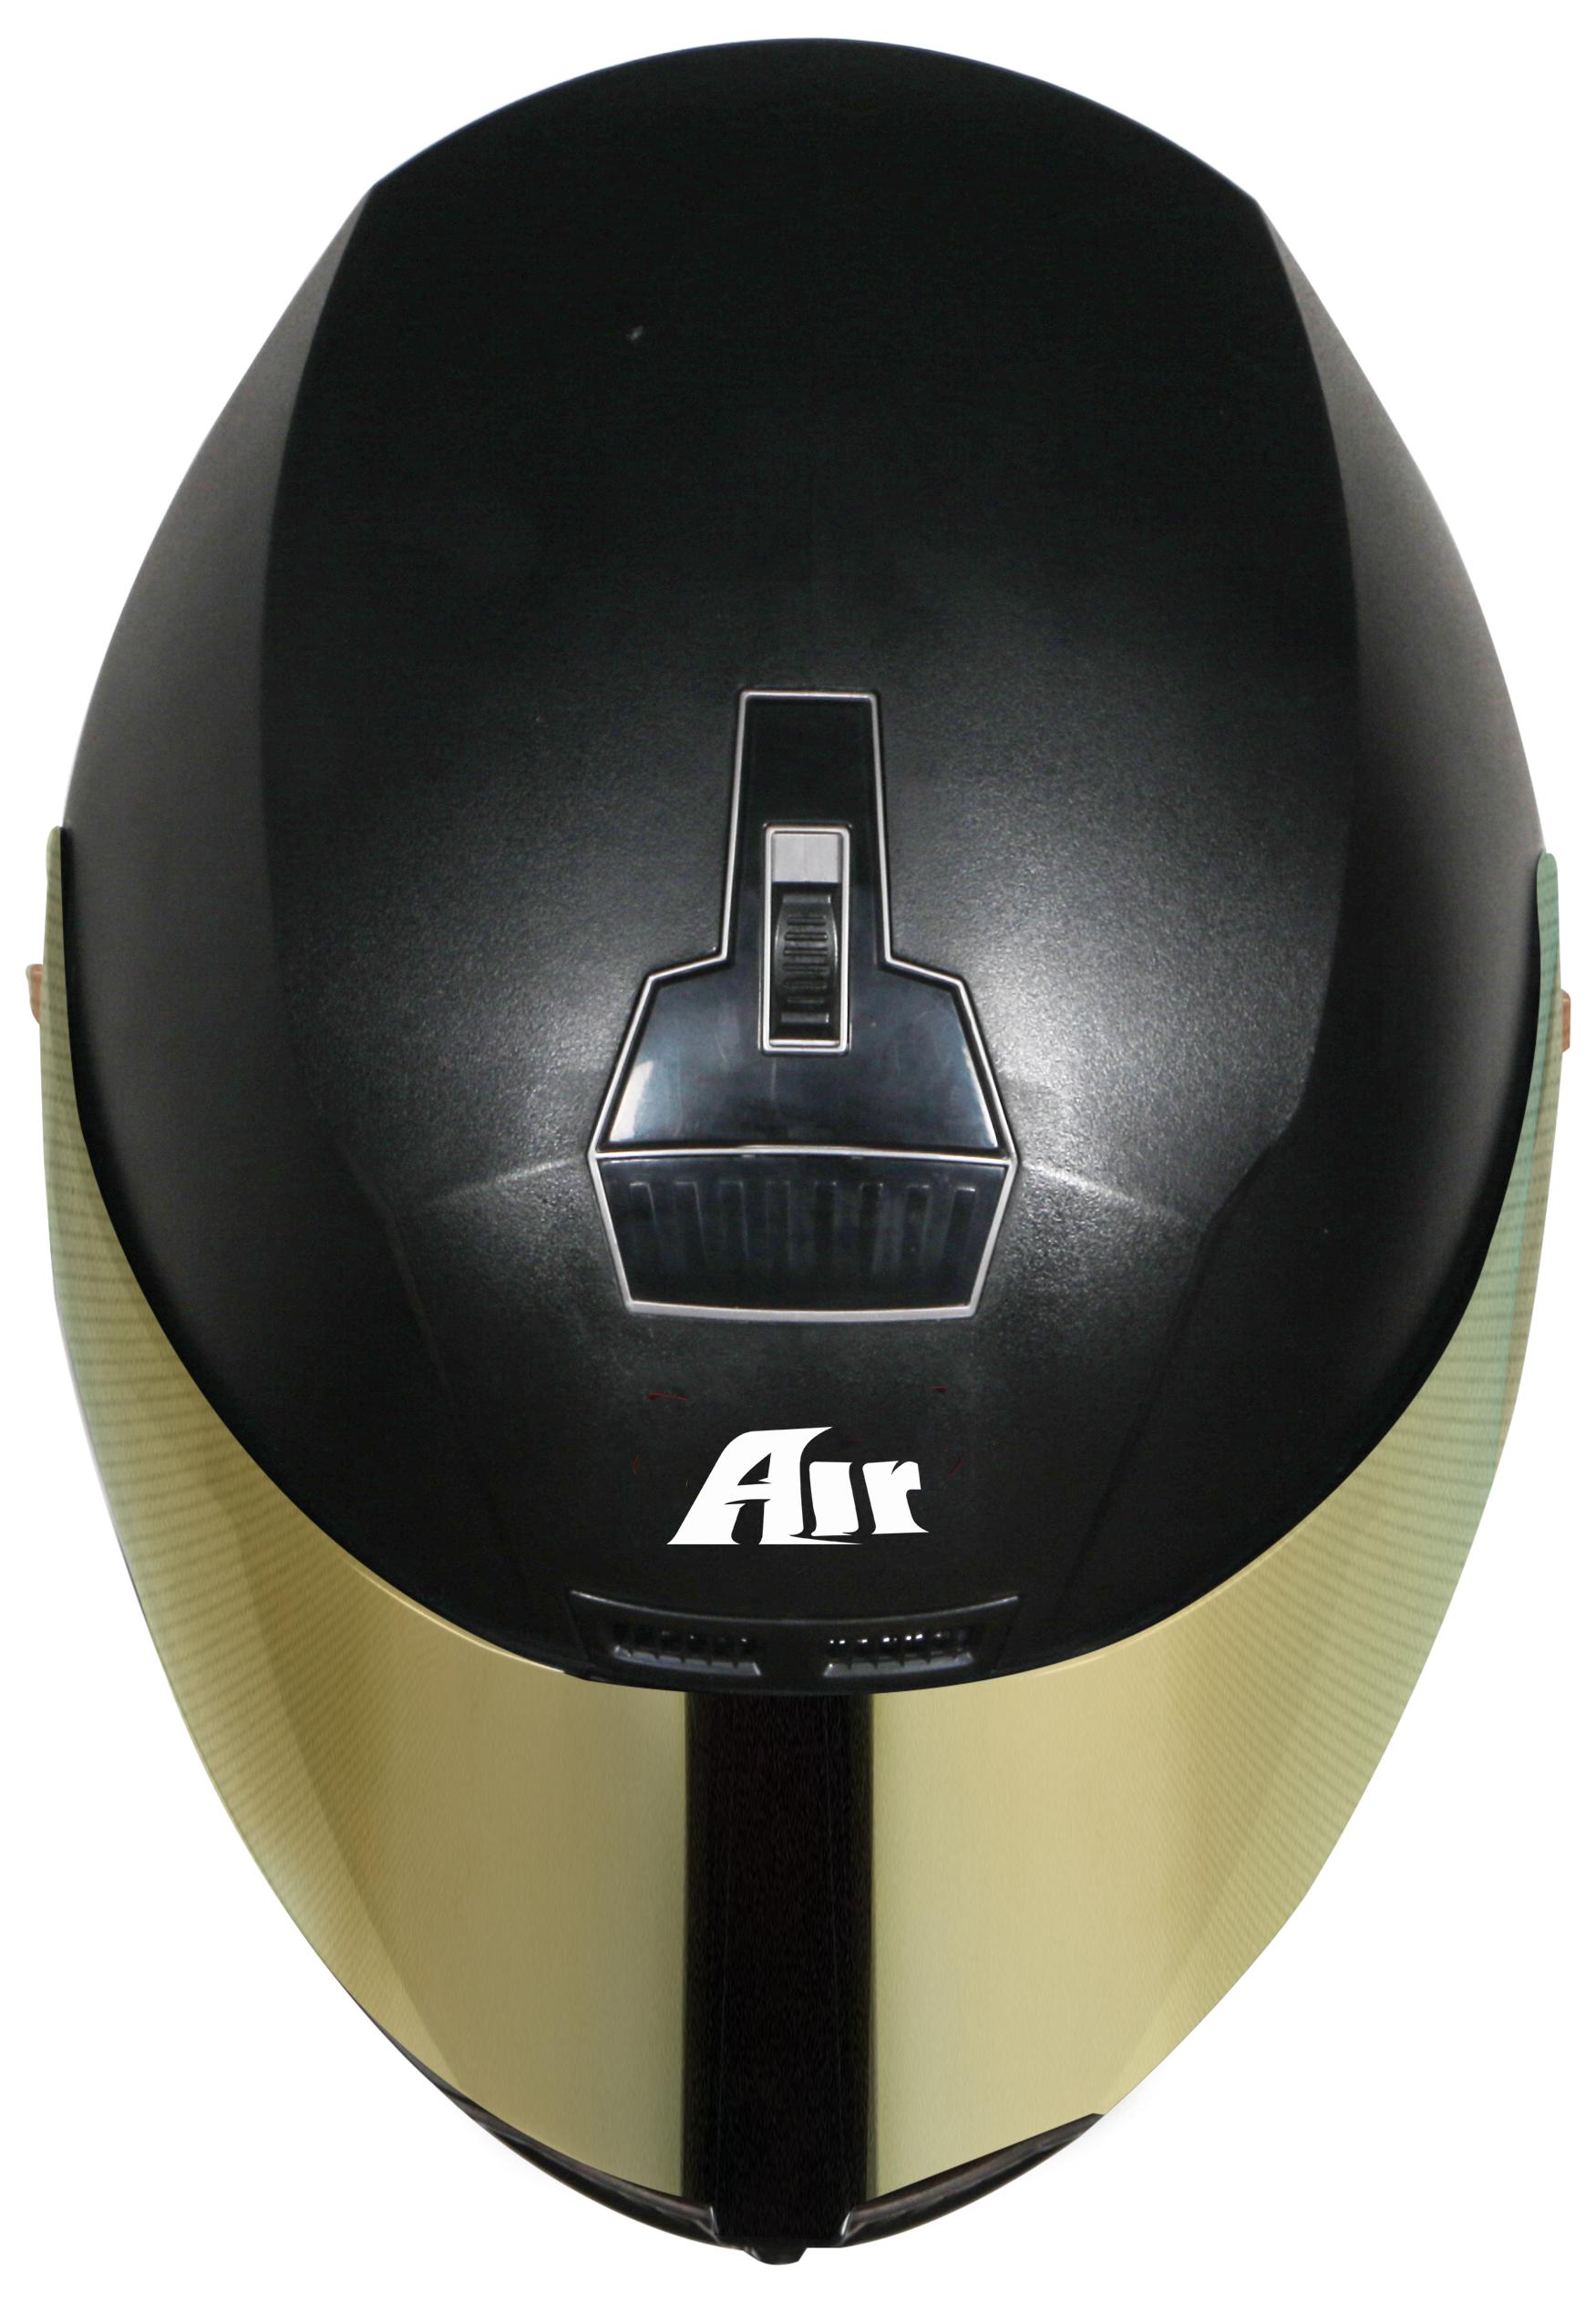 SBA-1 AIR DASHING BLACK FITTED WITH CLEAR VISOR ( EXTRA CHROME GOLD VISOR)